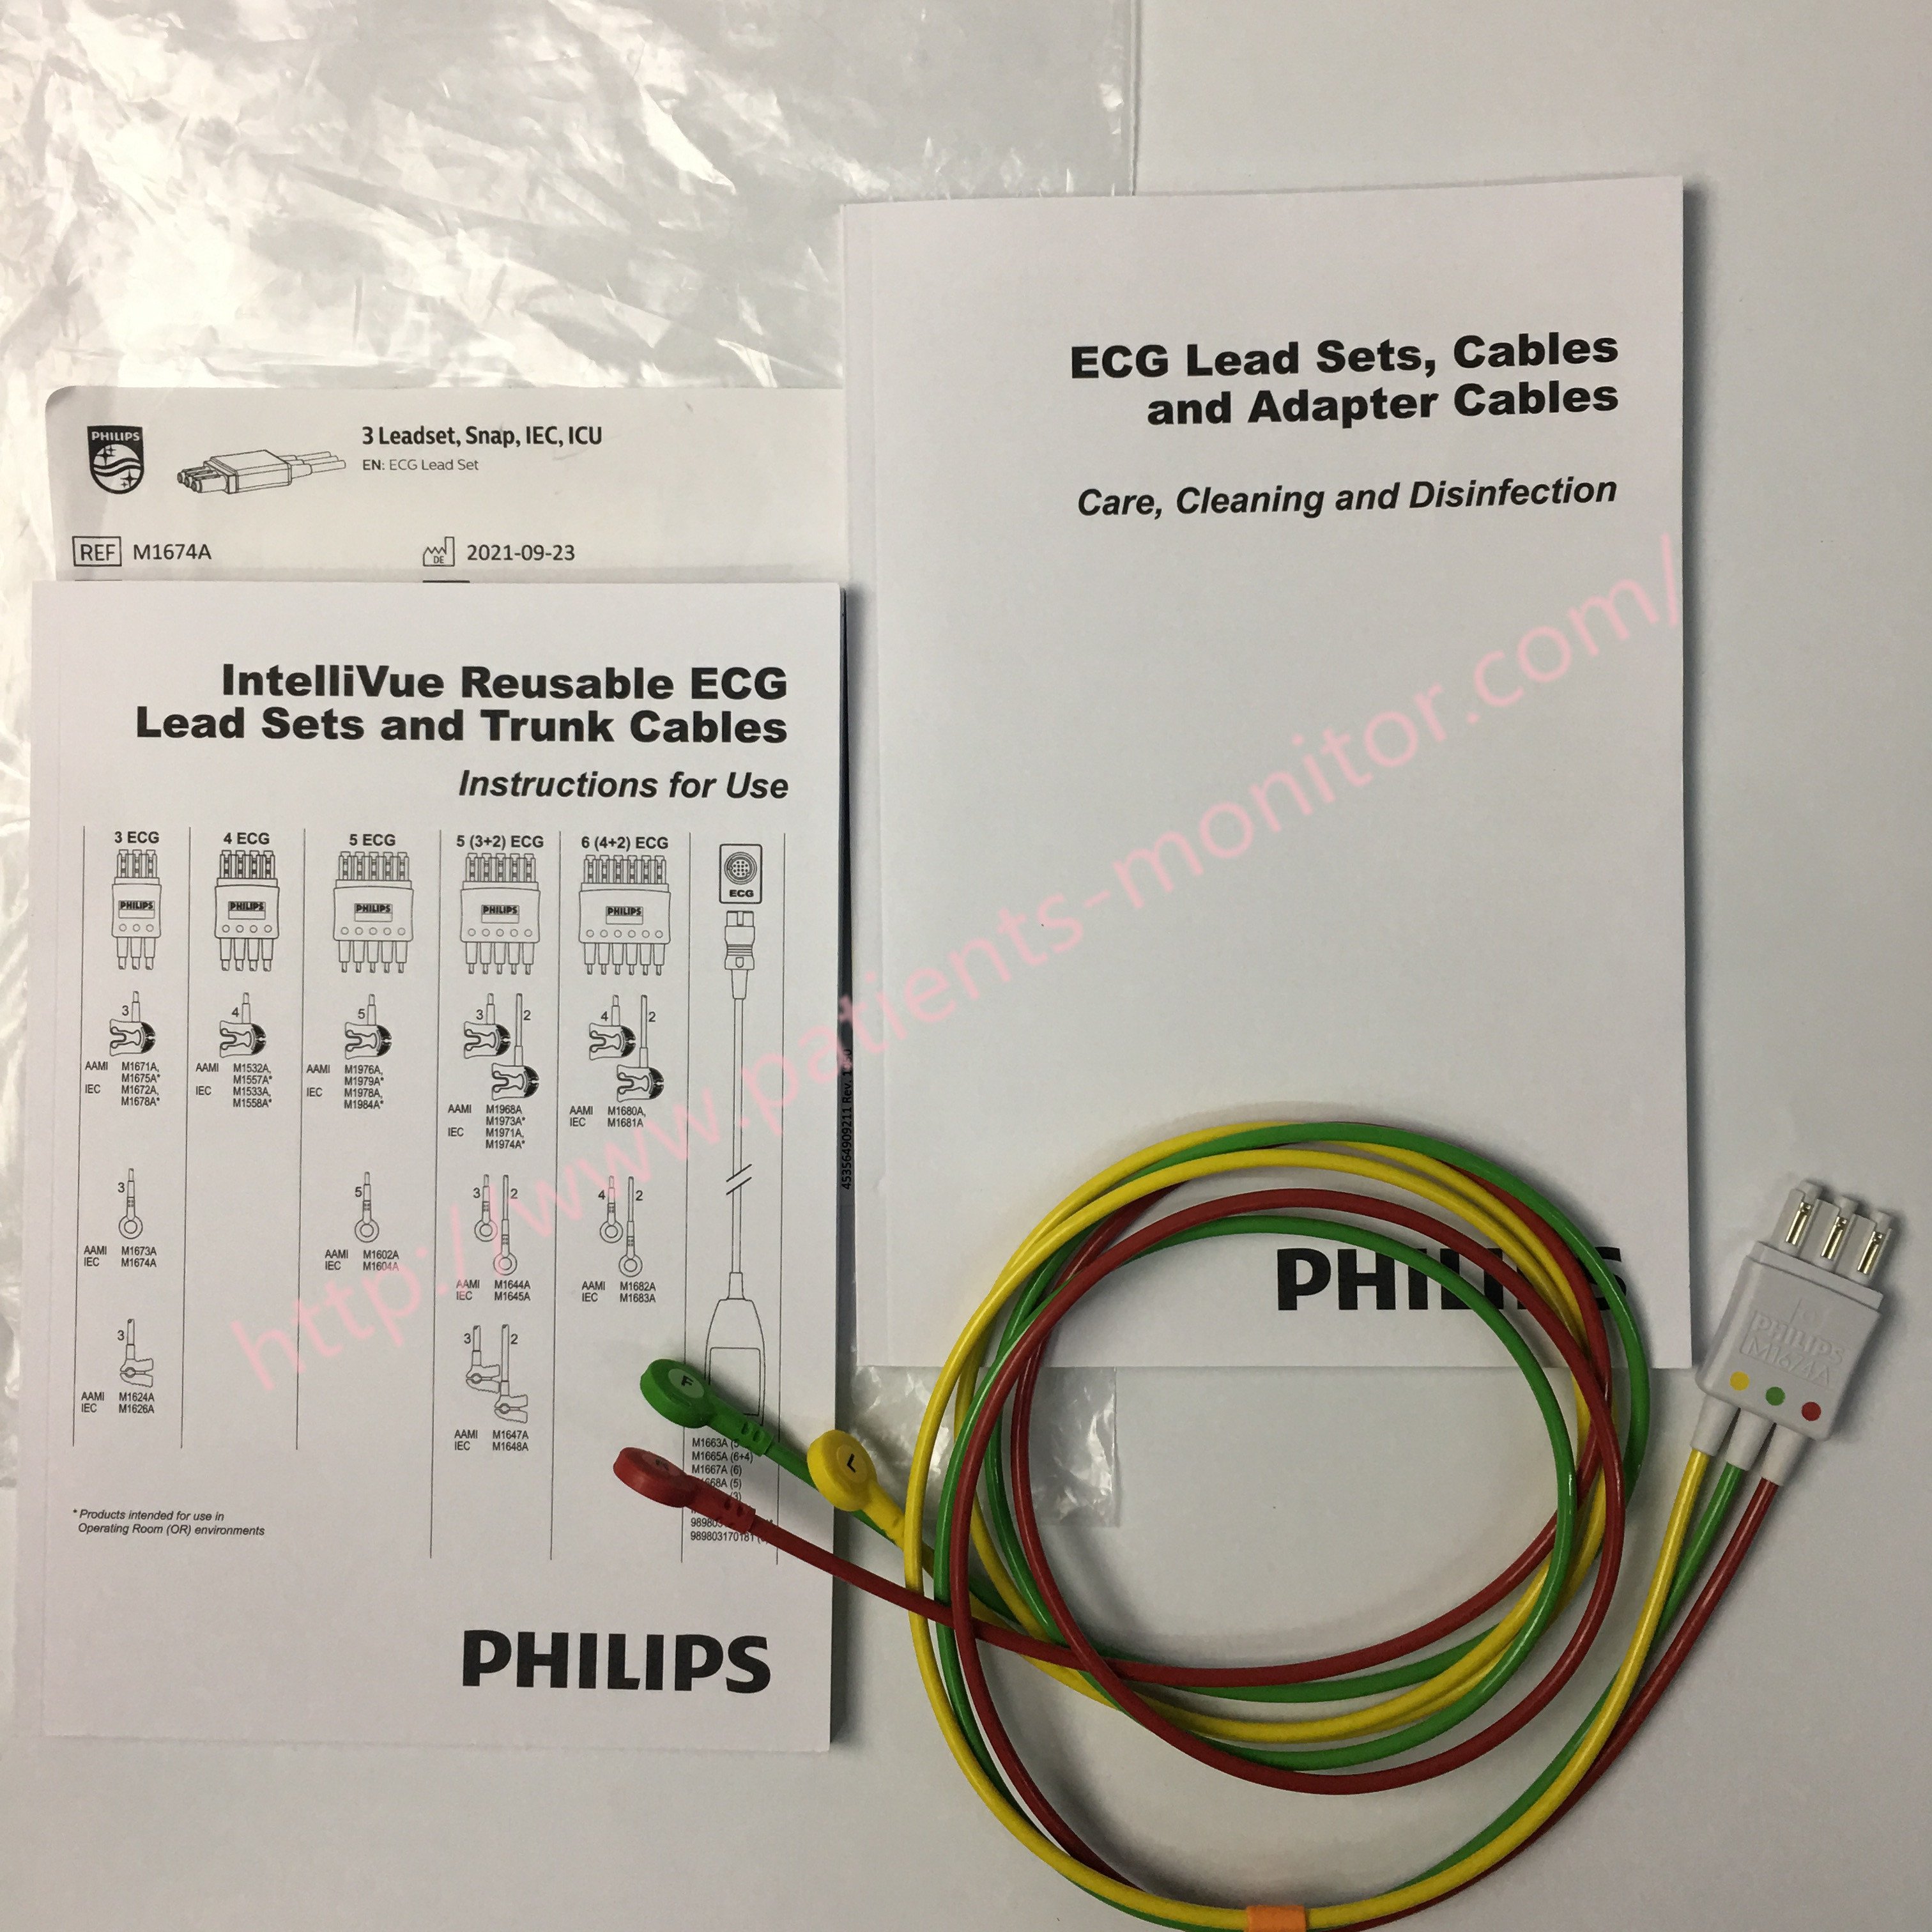  M1674A 989803145121 Philips ECG Lead Set 3 Leadset Snap IEC ICU Replacement Manufactures